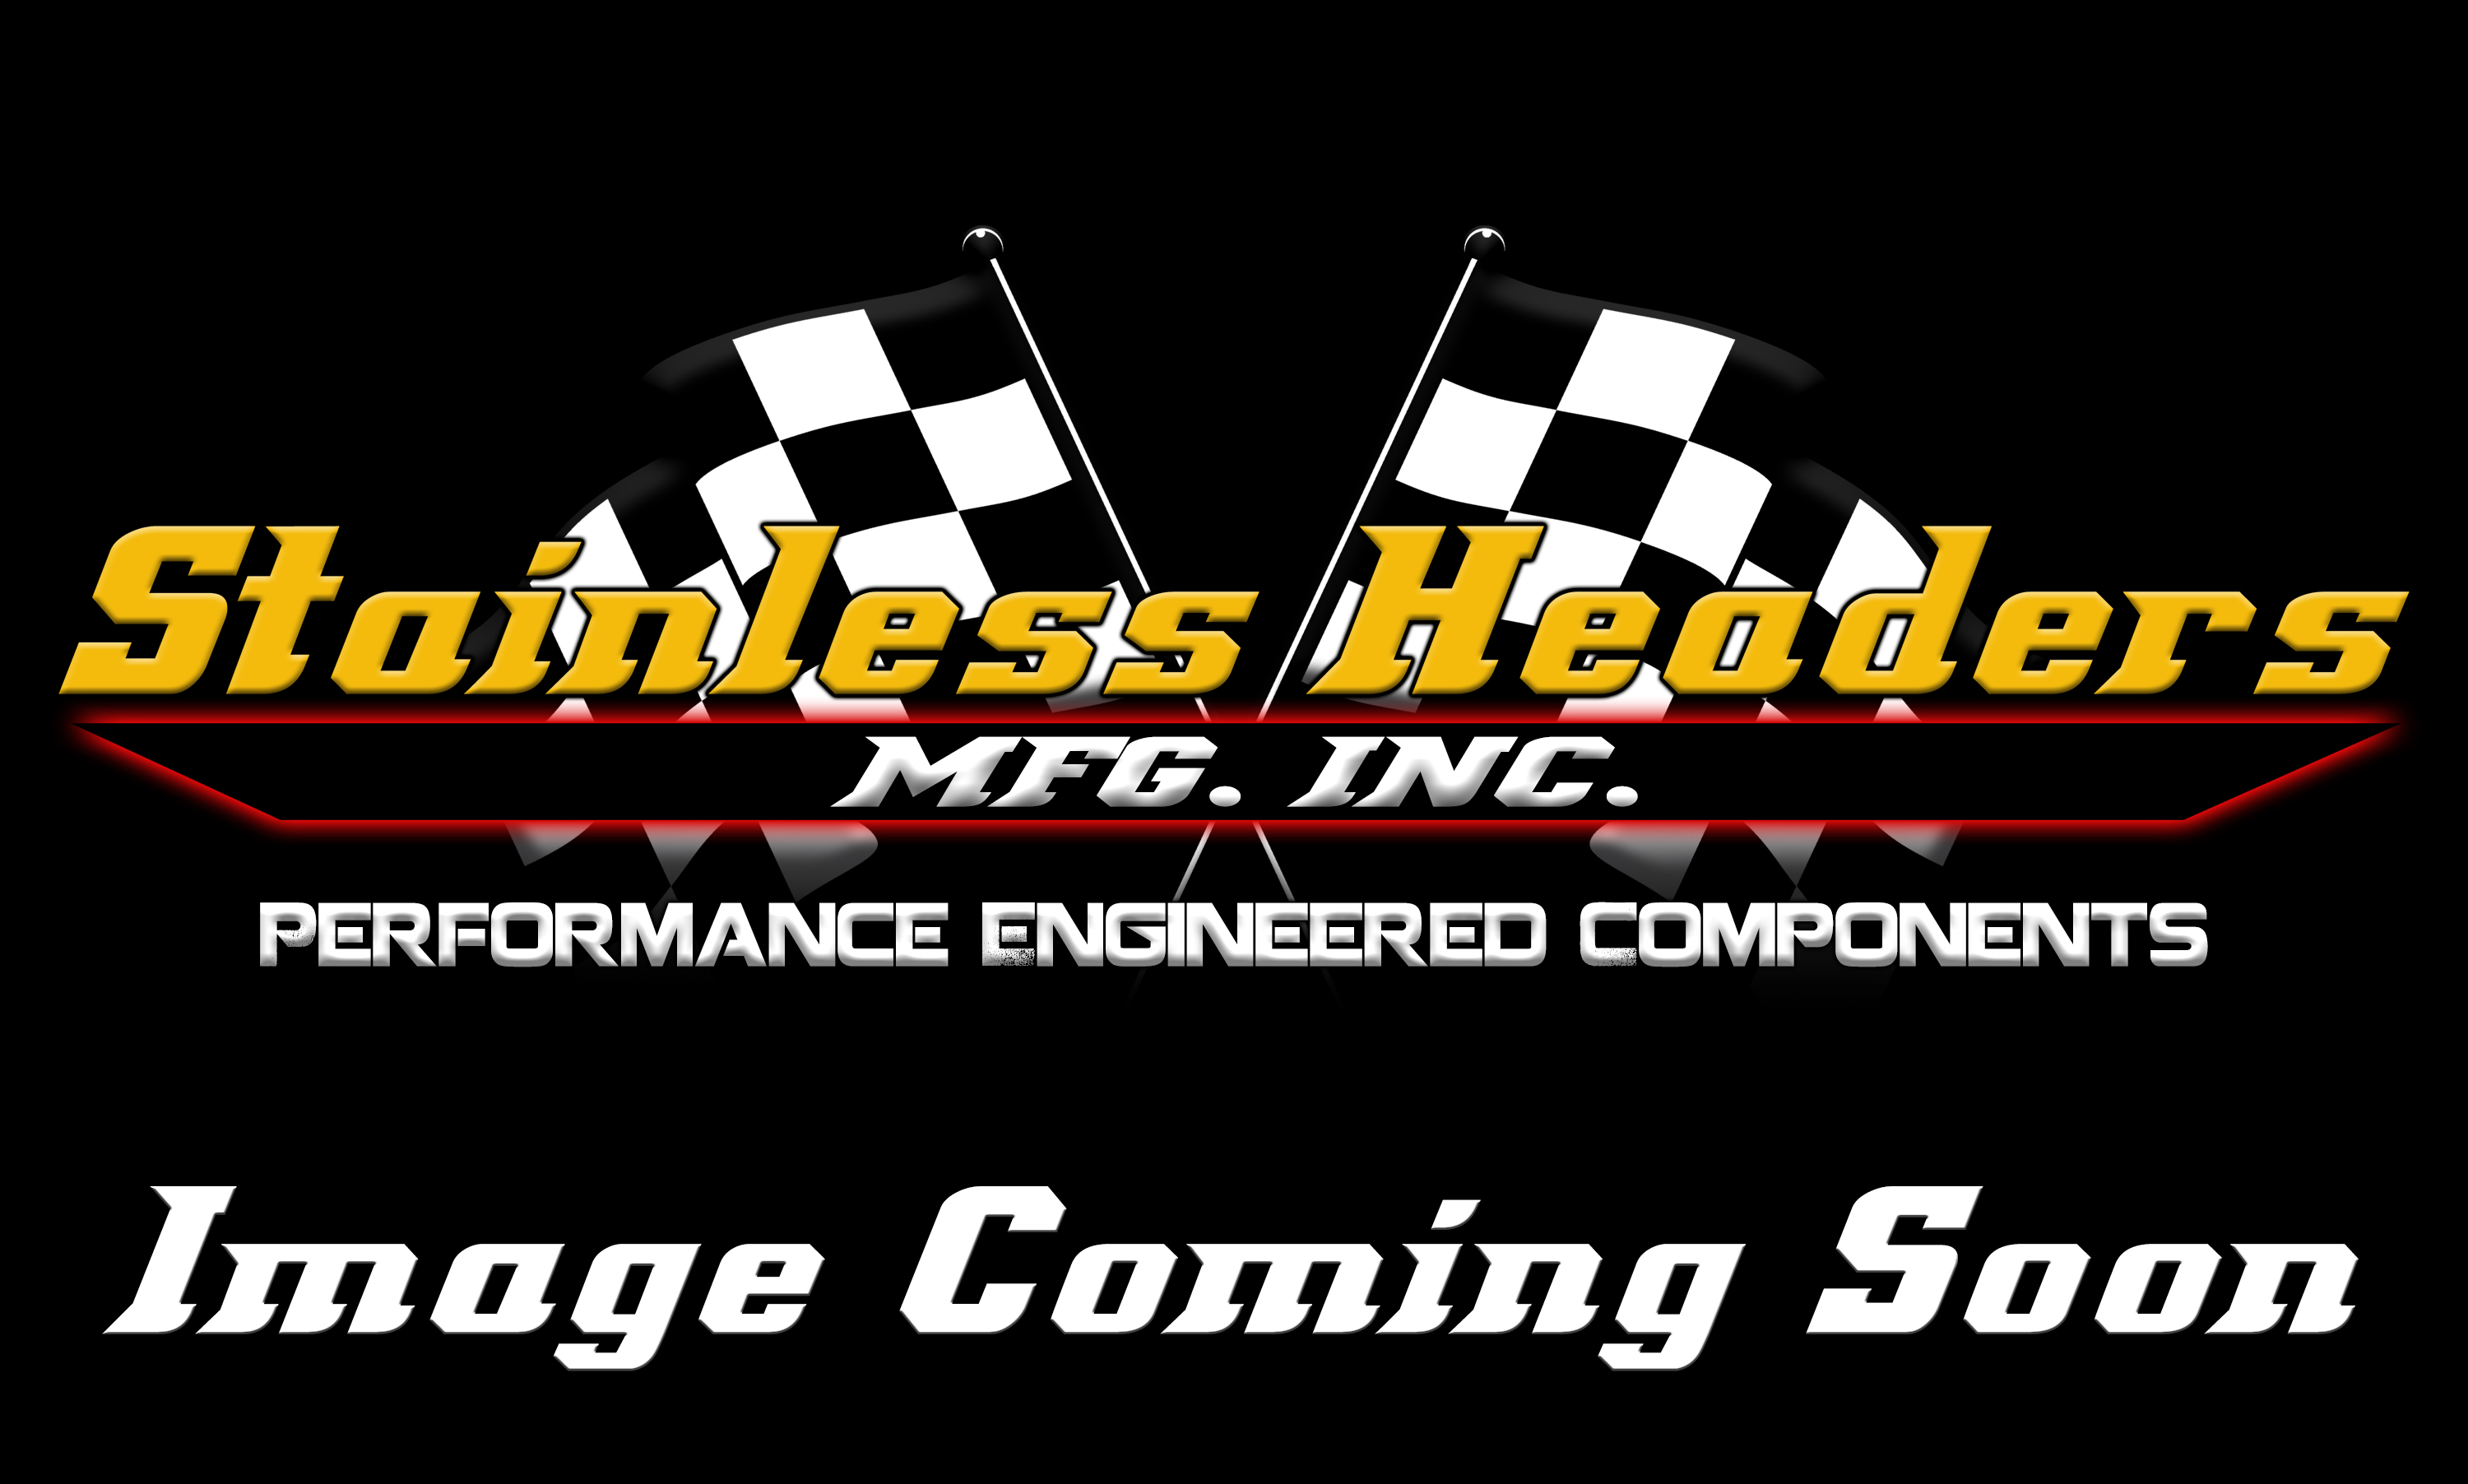 Custom Header Components - Merge Collectors - Stainless Headers - 1 1/2" Primary 4 into 1 Performance Merge Collector-16ga Mild Steel